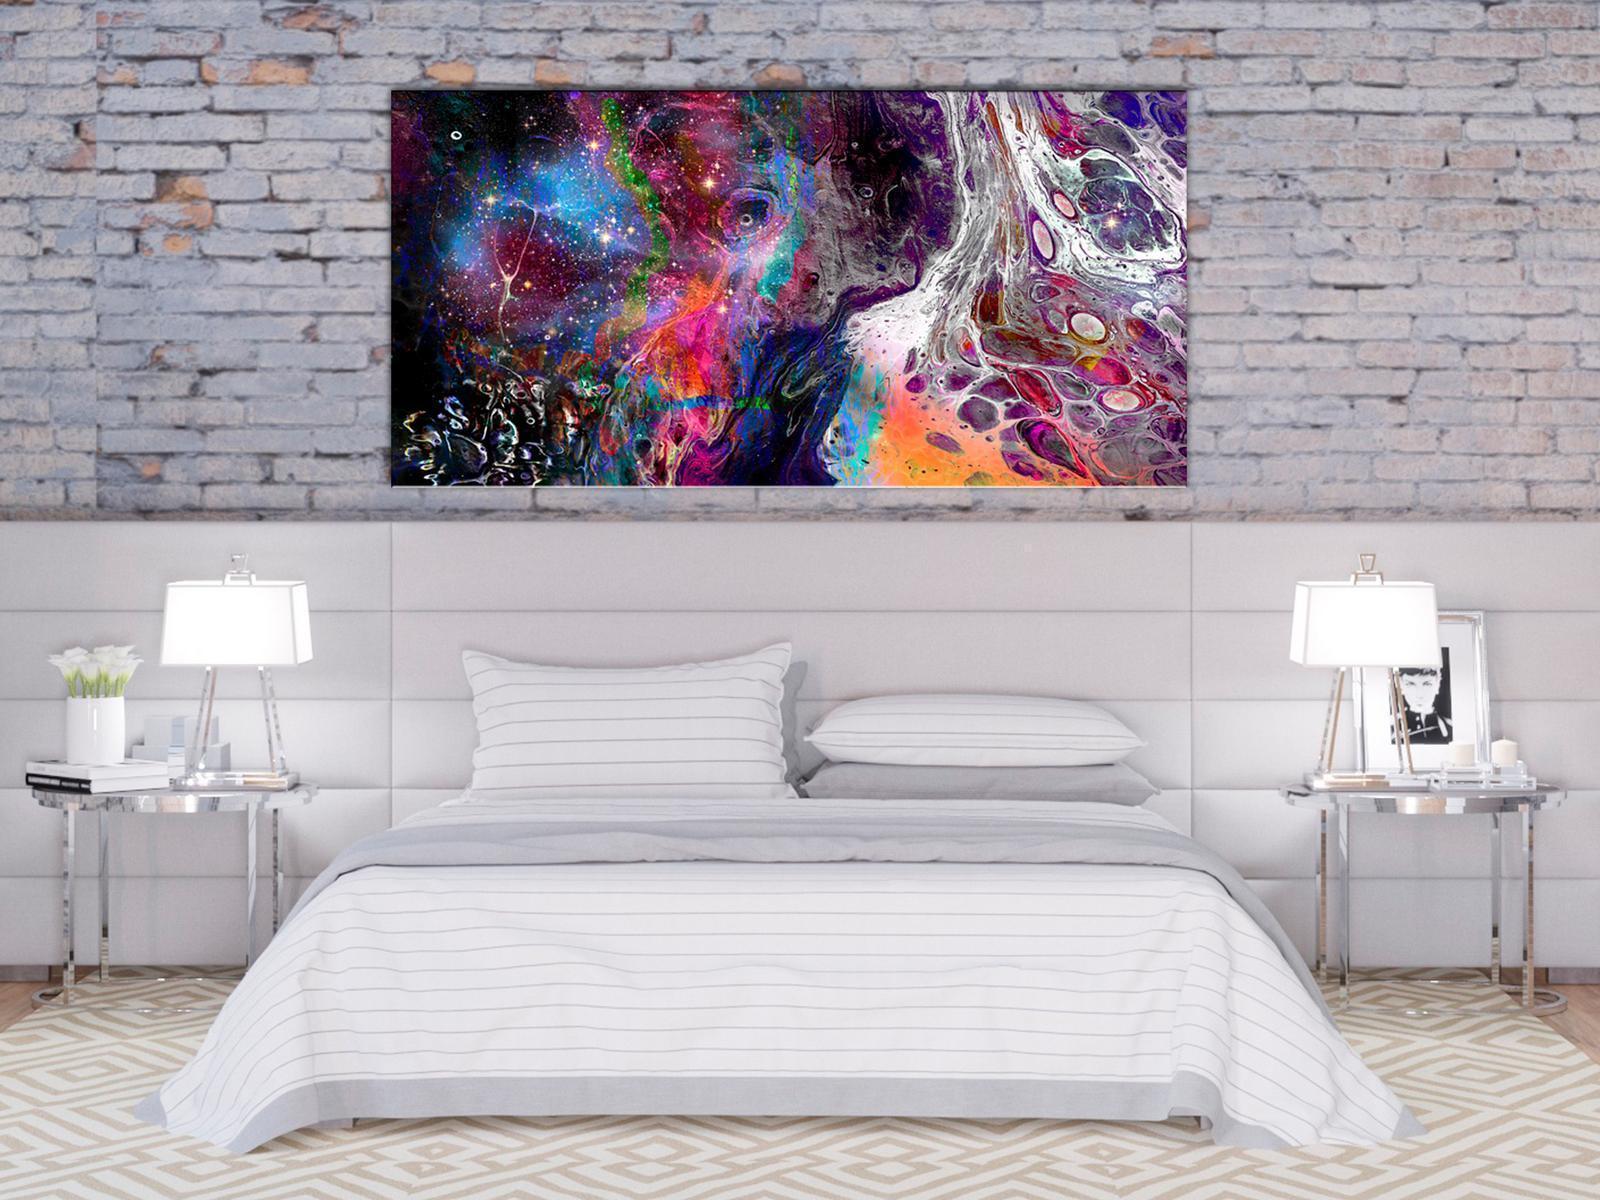 Tableau - Colourful Galaxy (1 Part) Wide